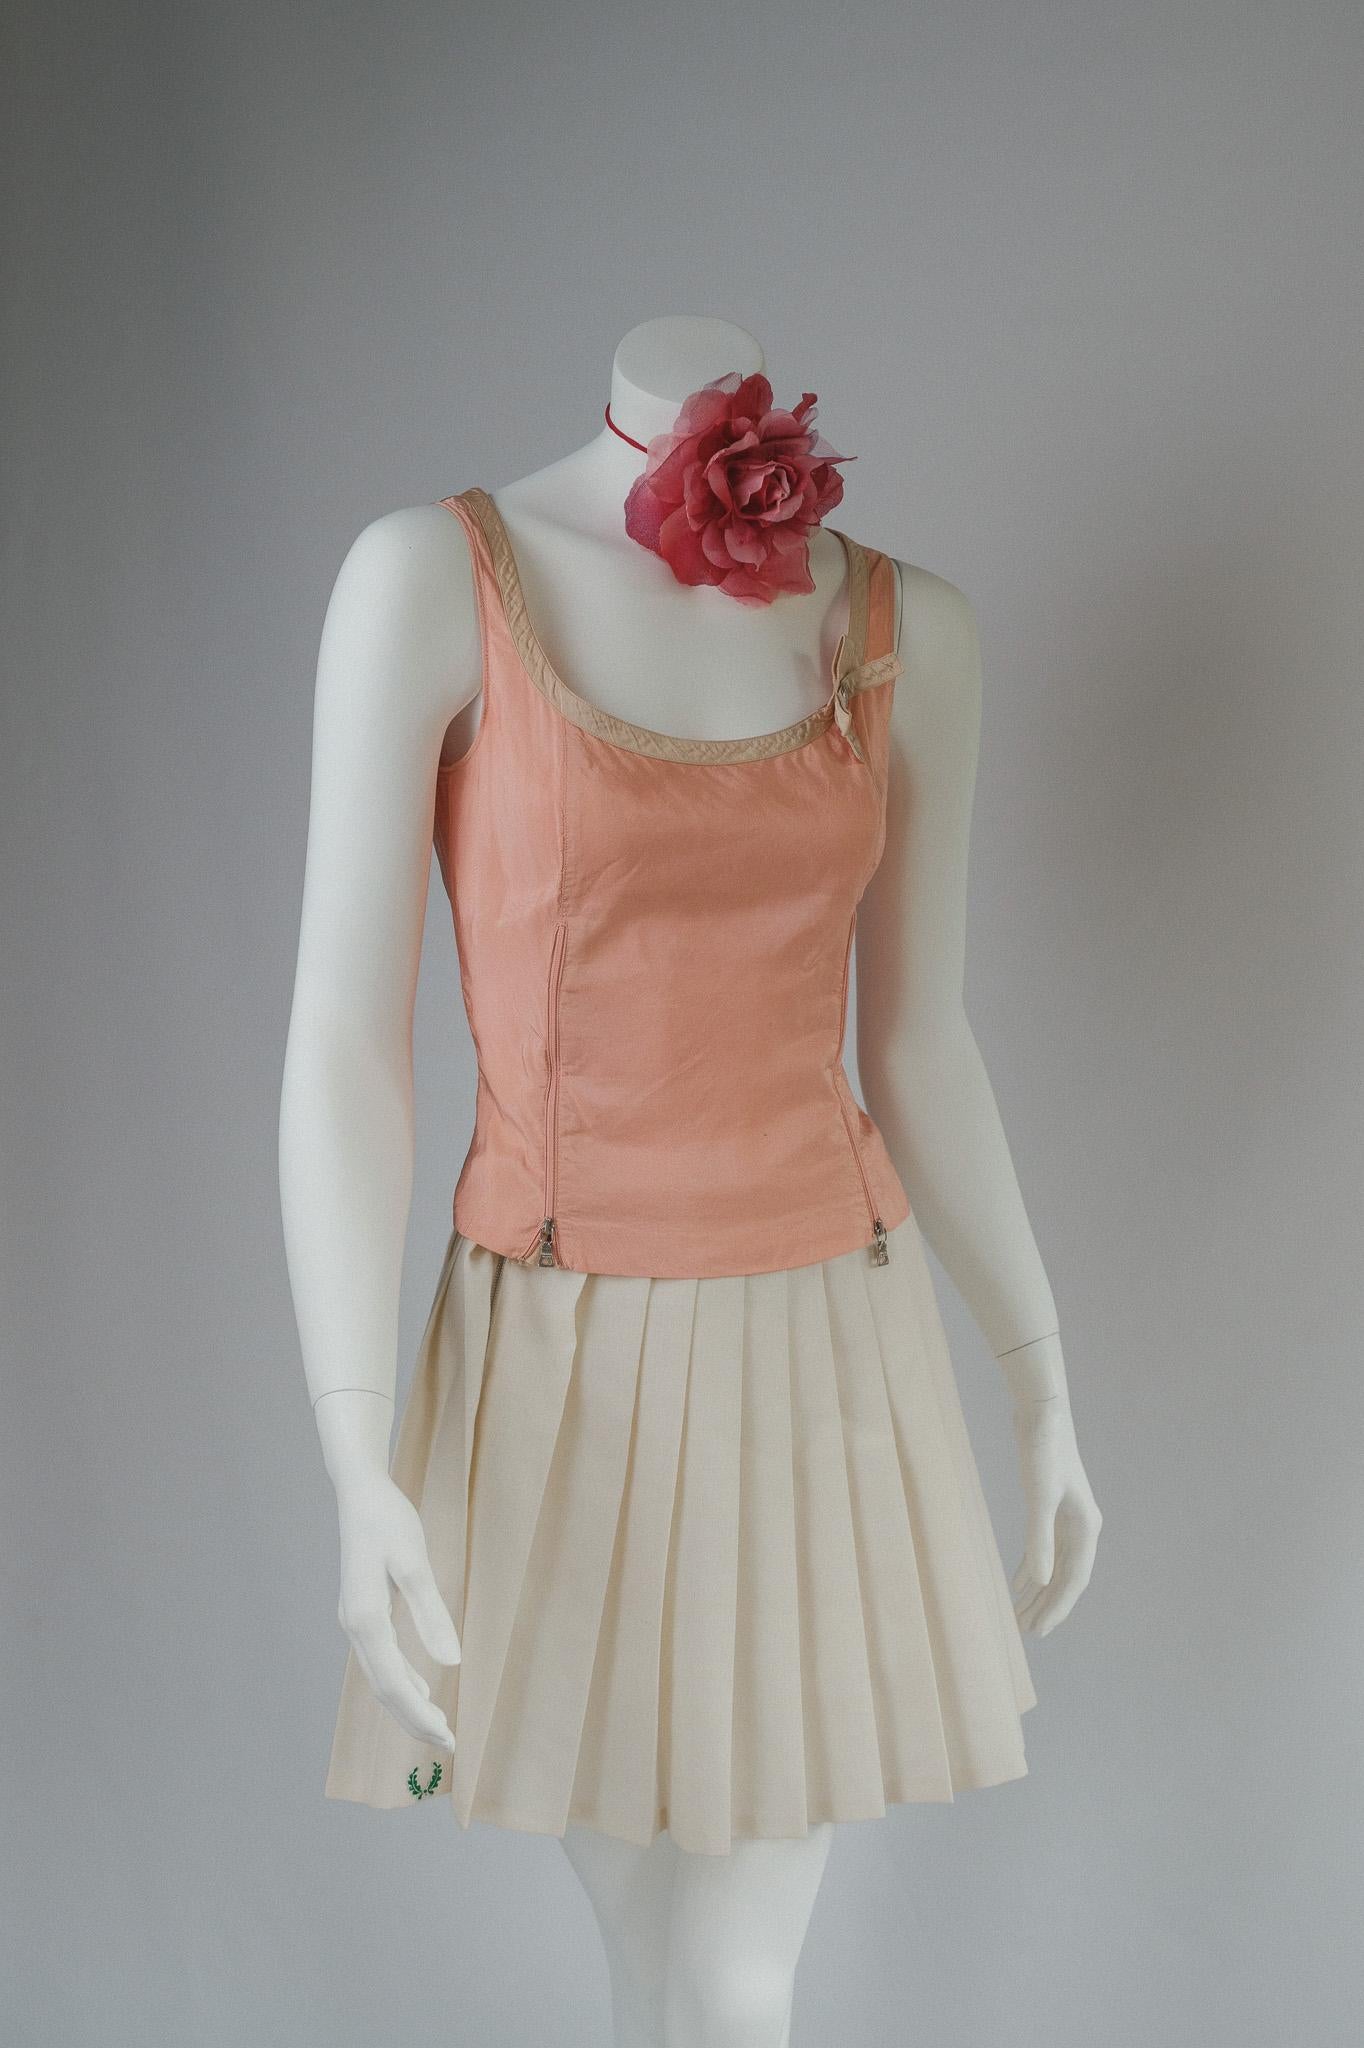 Prada Archival Baby Pink and Beige  Silk Corset Bustier Top w Zips Corset 
Pink silk with beige trim, beige lining. 

Tag size small 
good vintage condition,  wear to be expected of any secondhand or vintage item delicate silk item. 
Slight mark on